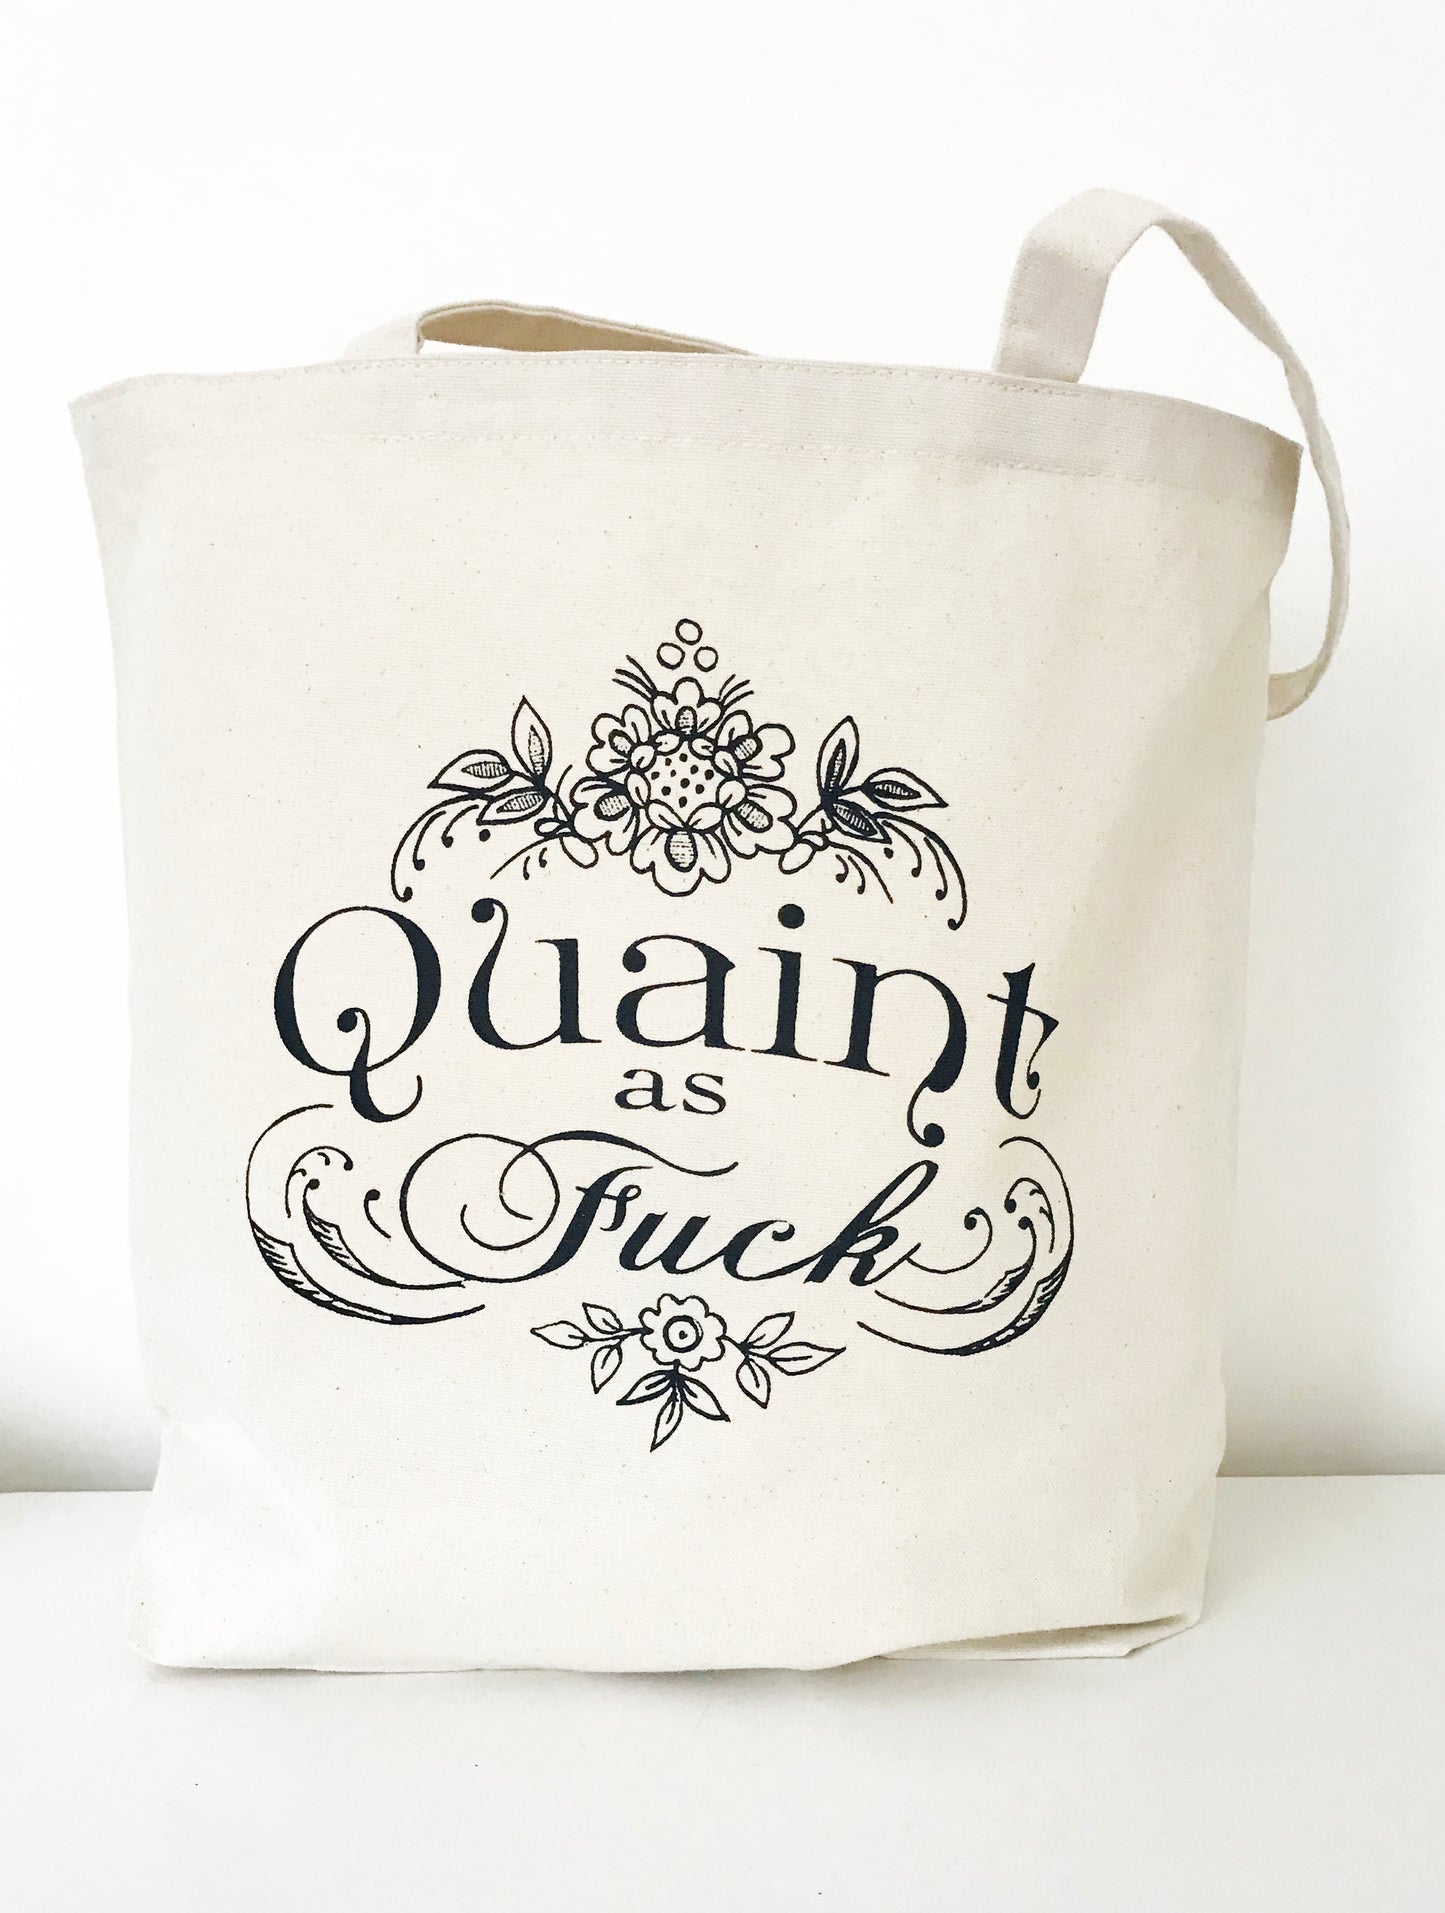 sturdy cotton tote bag quaint as fuck af cute pretty vintage style design farmer's market carry all swear word canvas reusable tote coin laundry screen print